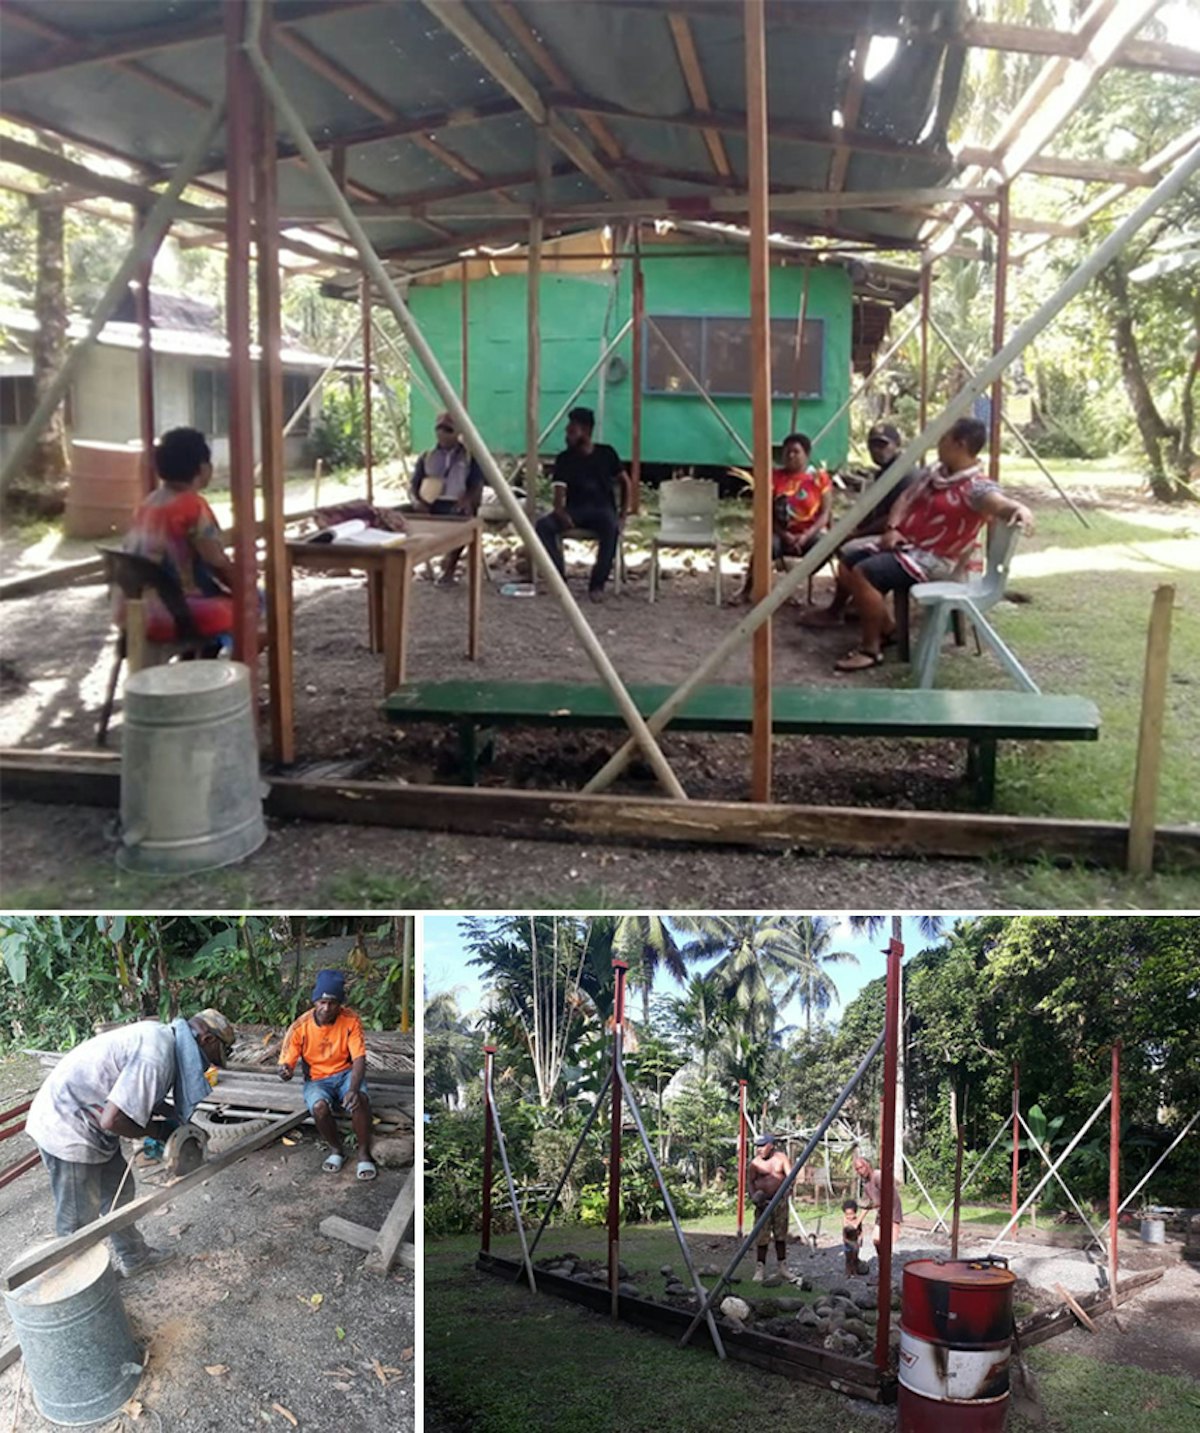 The community in Lae, Papua New Guinea, is raising a building to house educational activities, among its other initiatives specially planned for the bicentenary.